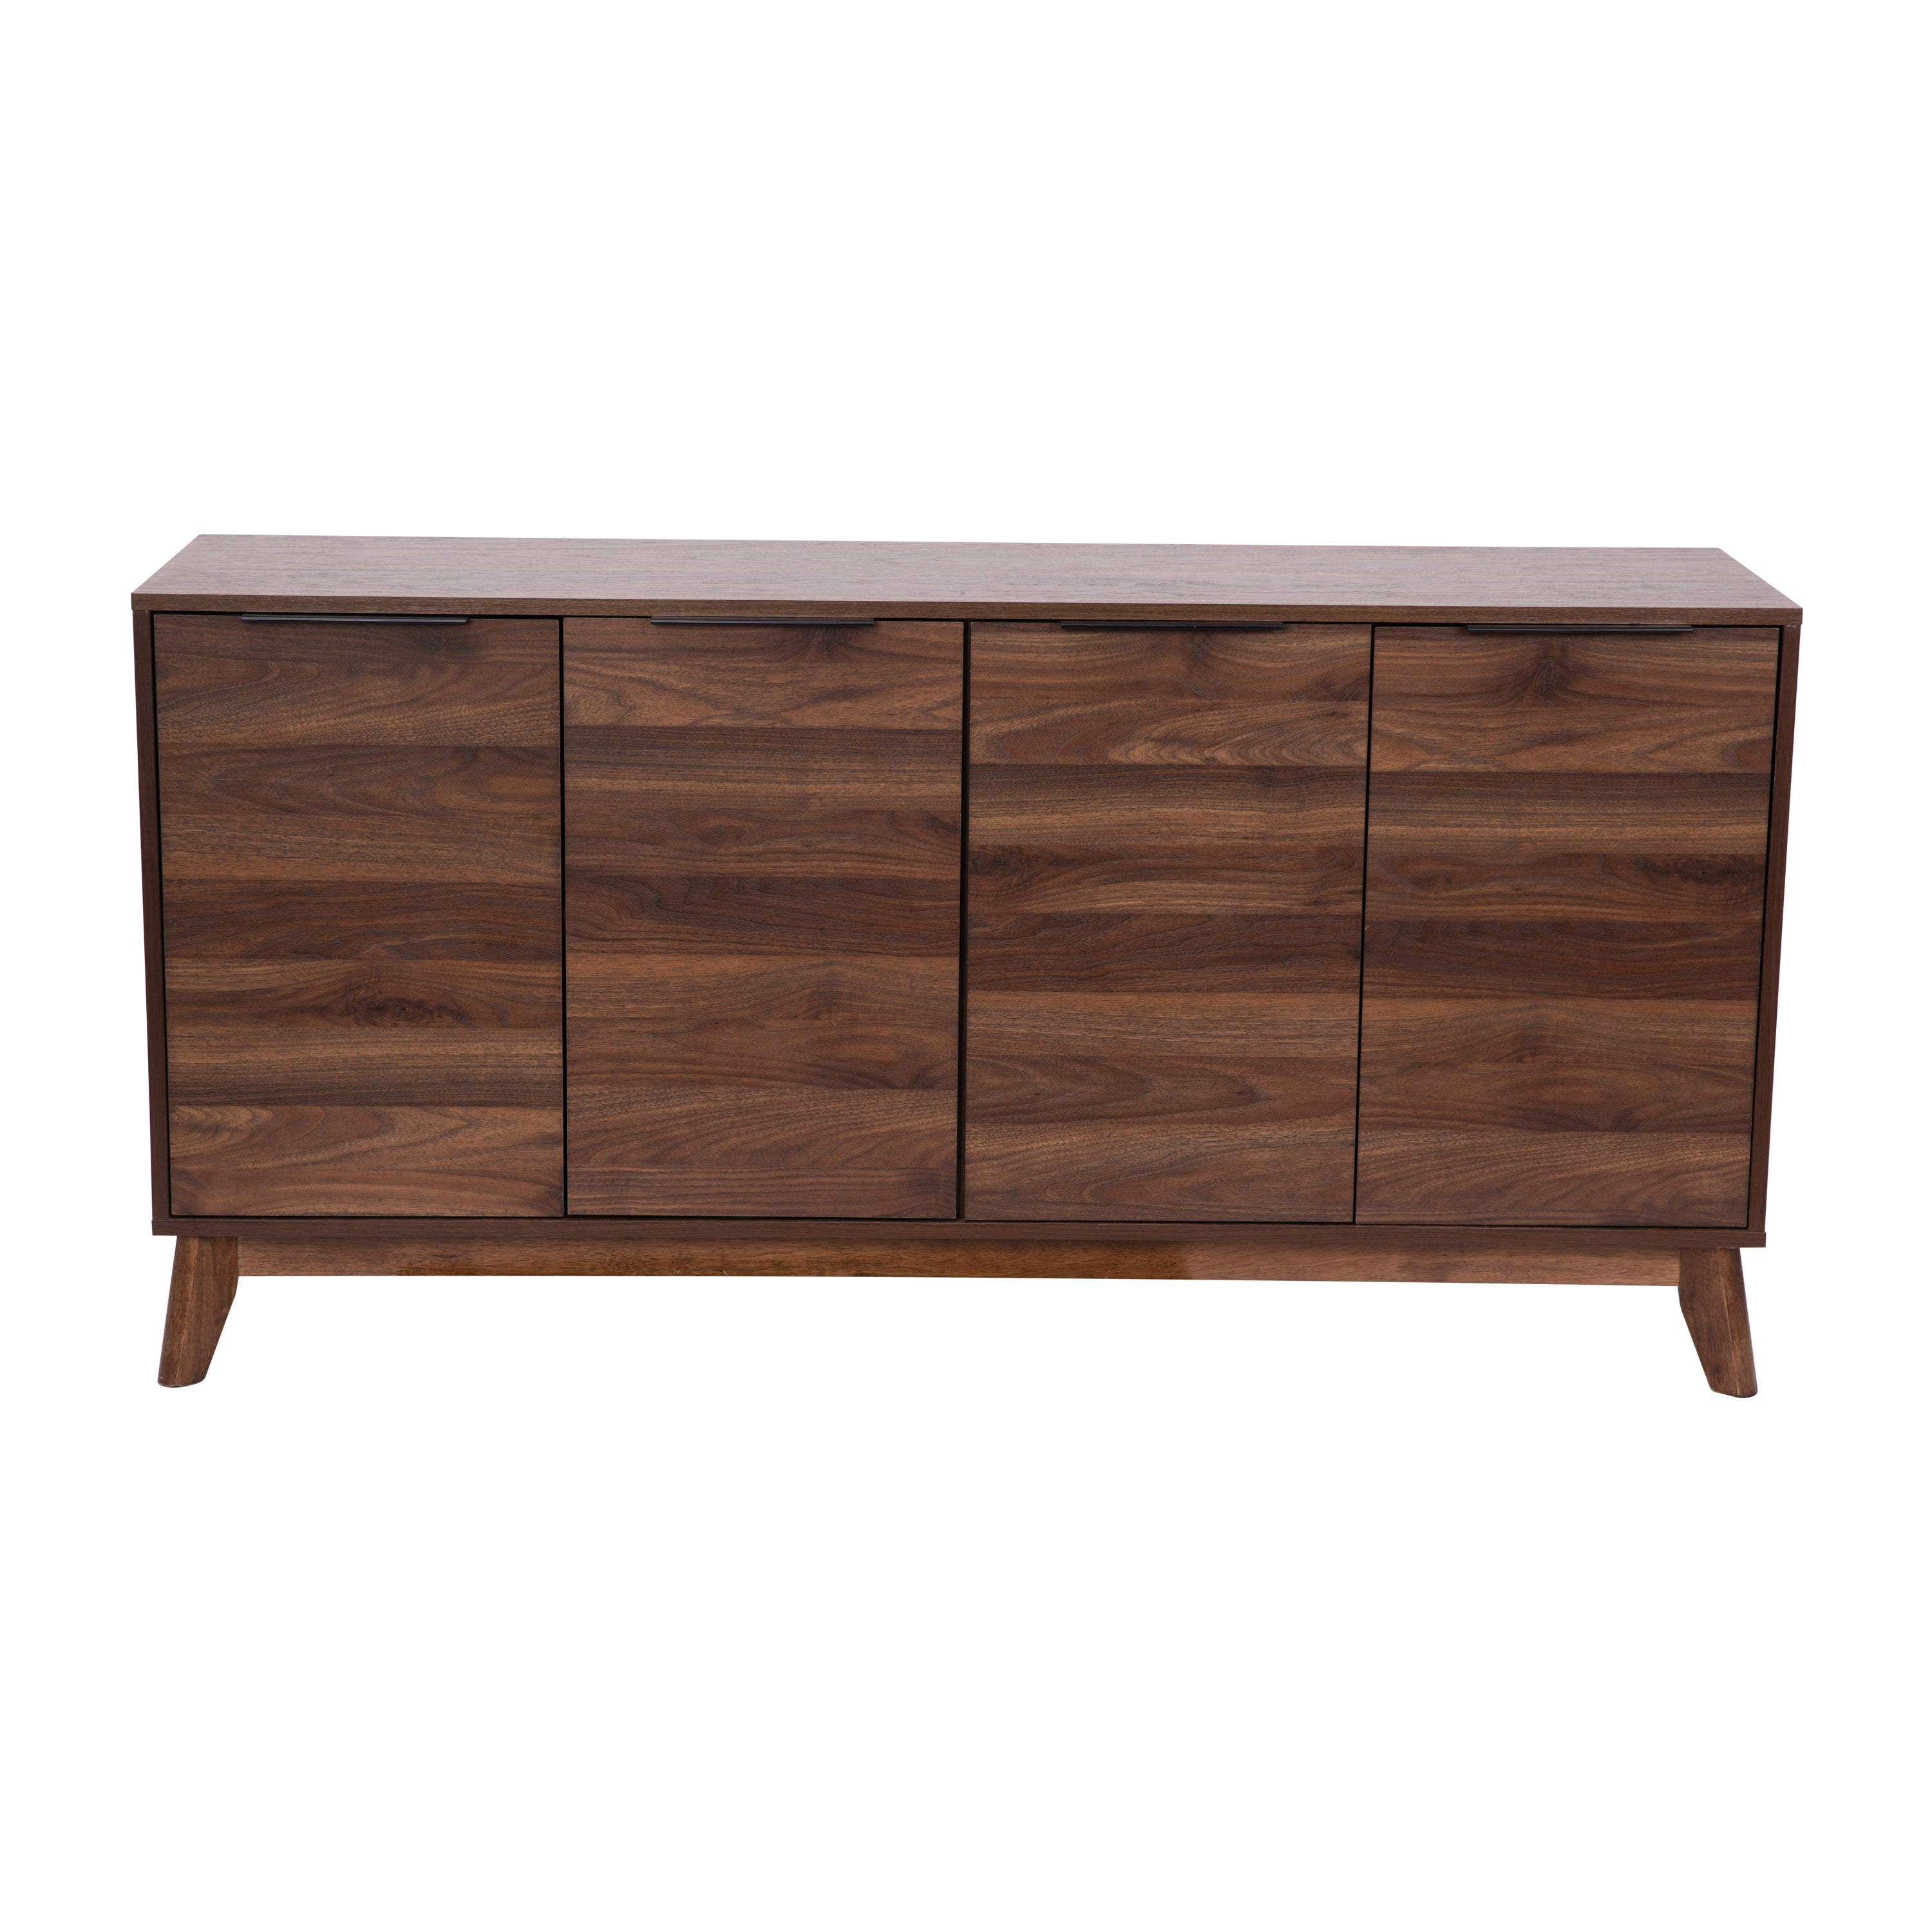 Hatfield Mid-Century Modern 4 Door Storage Buffet Sideboard, 4 Soft Close Doors, Adjustable Shelves, TV Stand for up to 64" TV's-TV Stand-Flash Furniture-Wall2Wall Furnishings